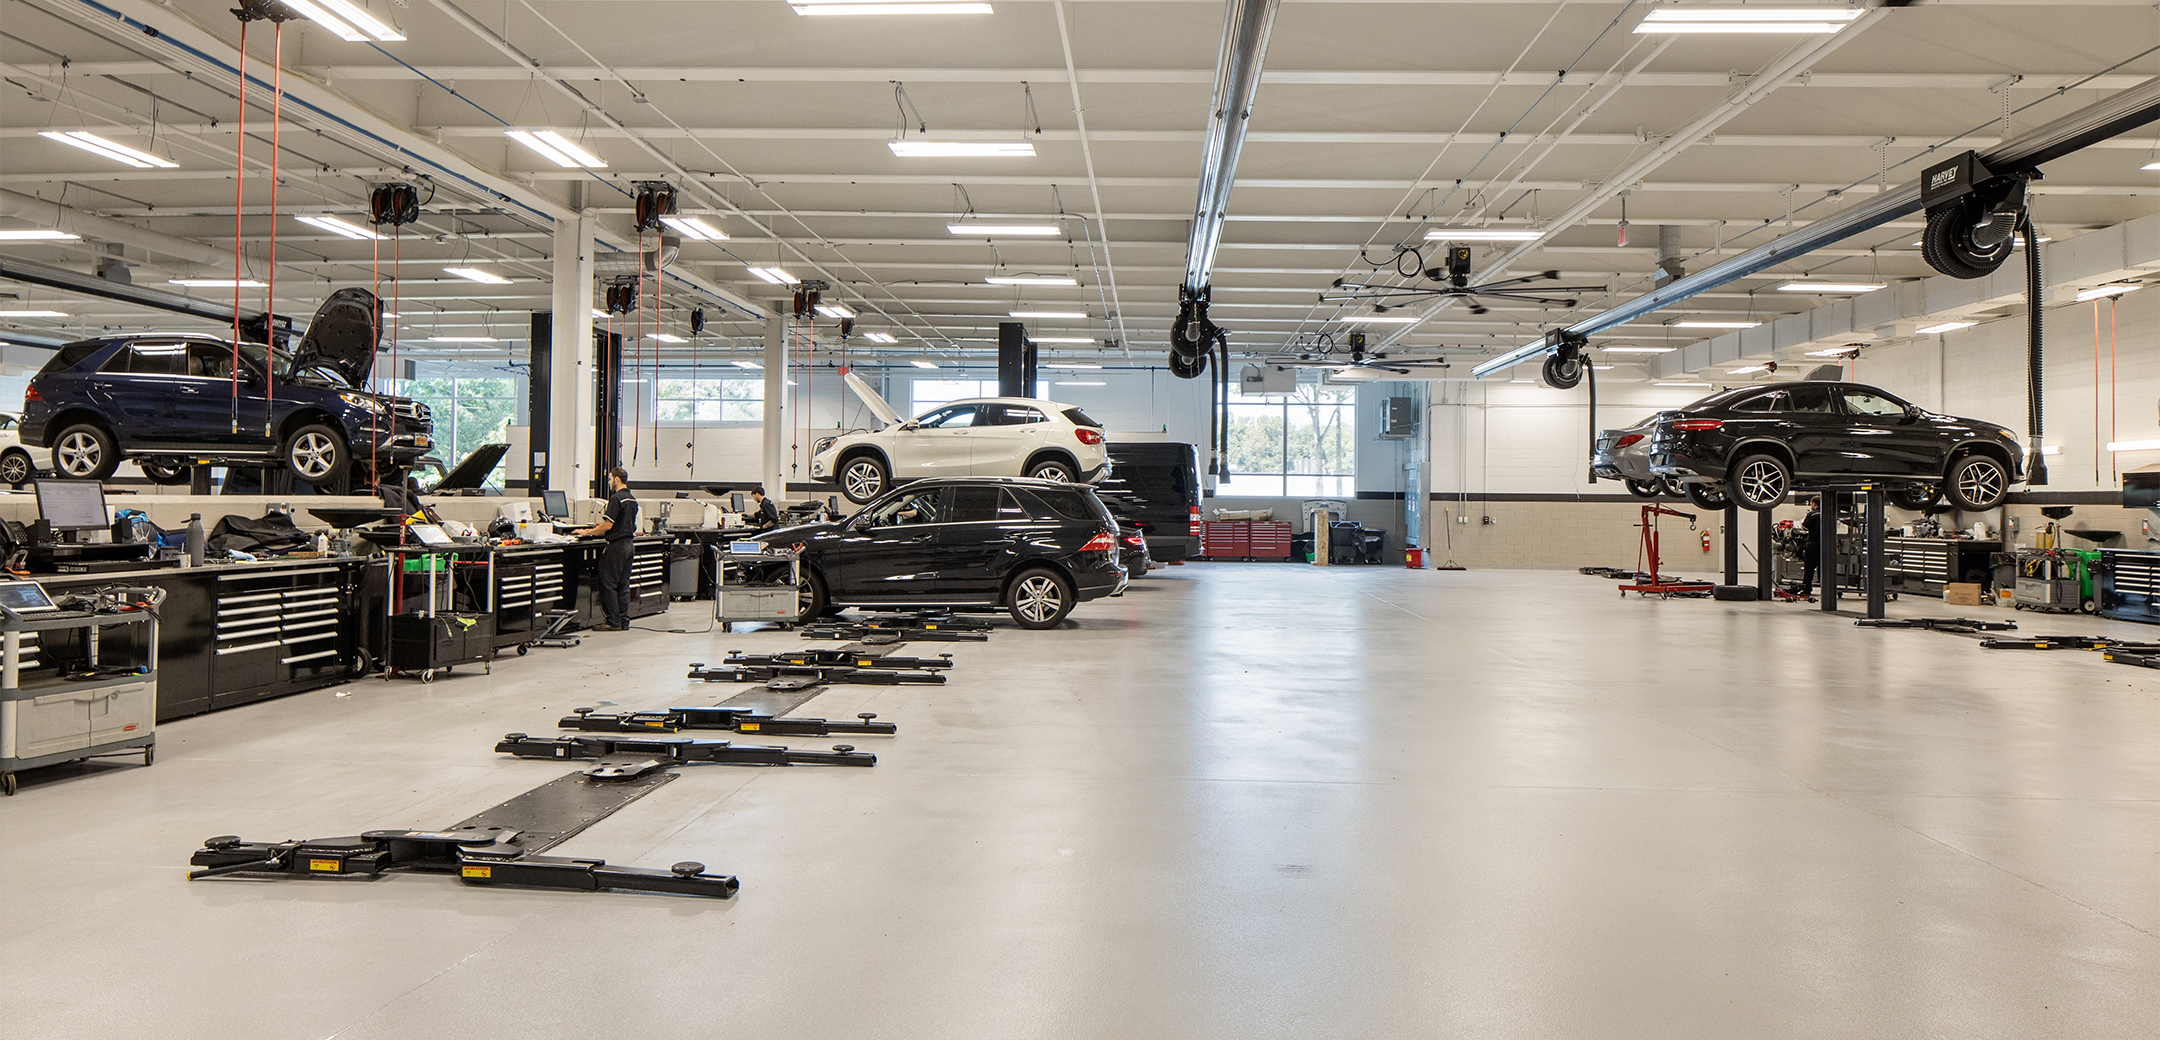 An interior view of Mercedes Benz of Caldwell garage showcasing the well lit tall ceiling, stationary car jacks, power jacks and cars in the background.